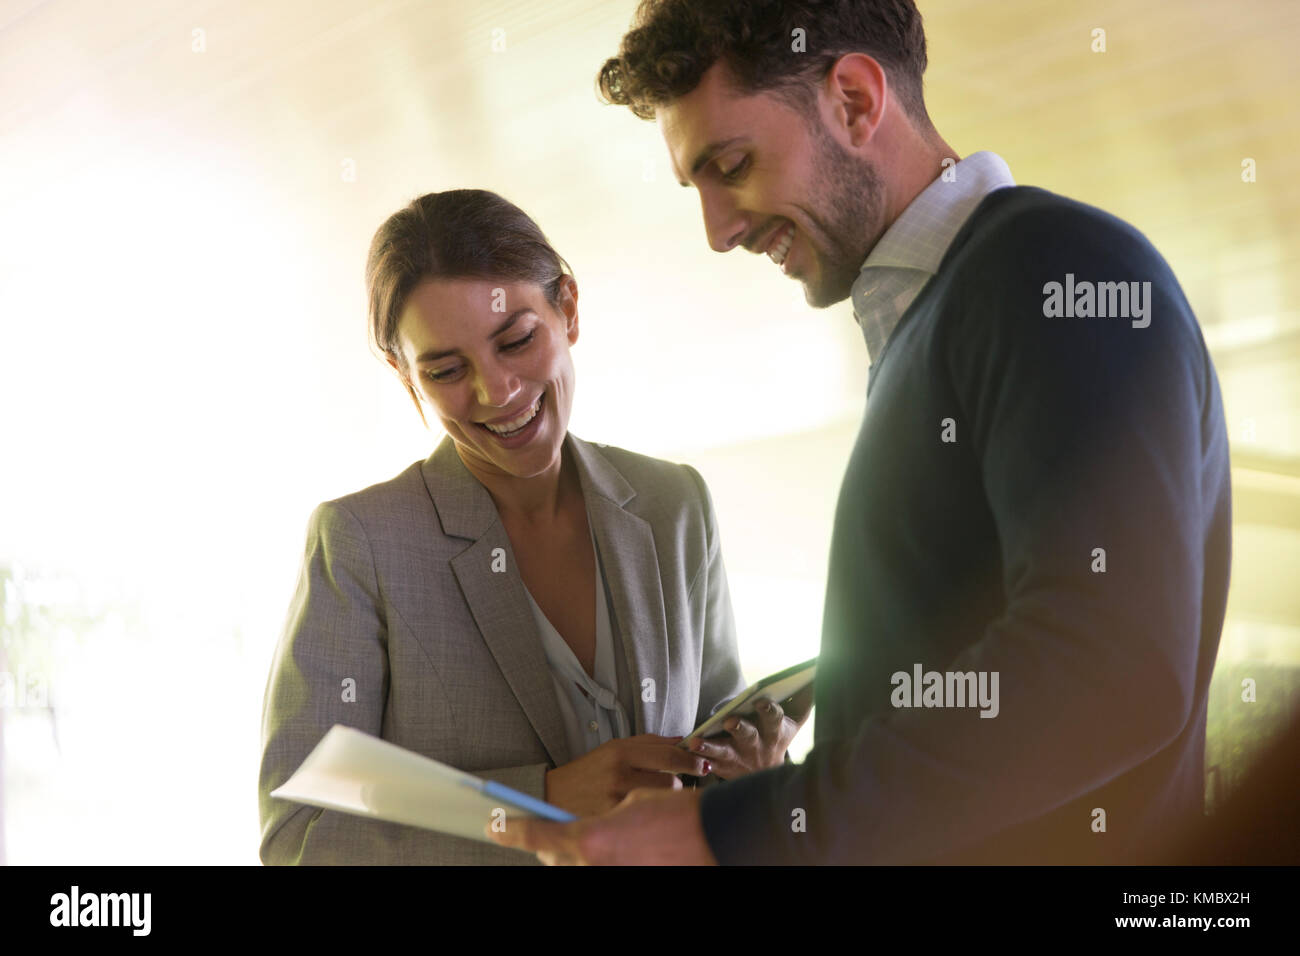 Smiling businessman and businesswoman discussing paperwork Stock Photo